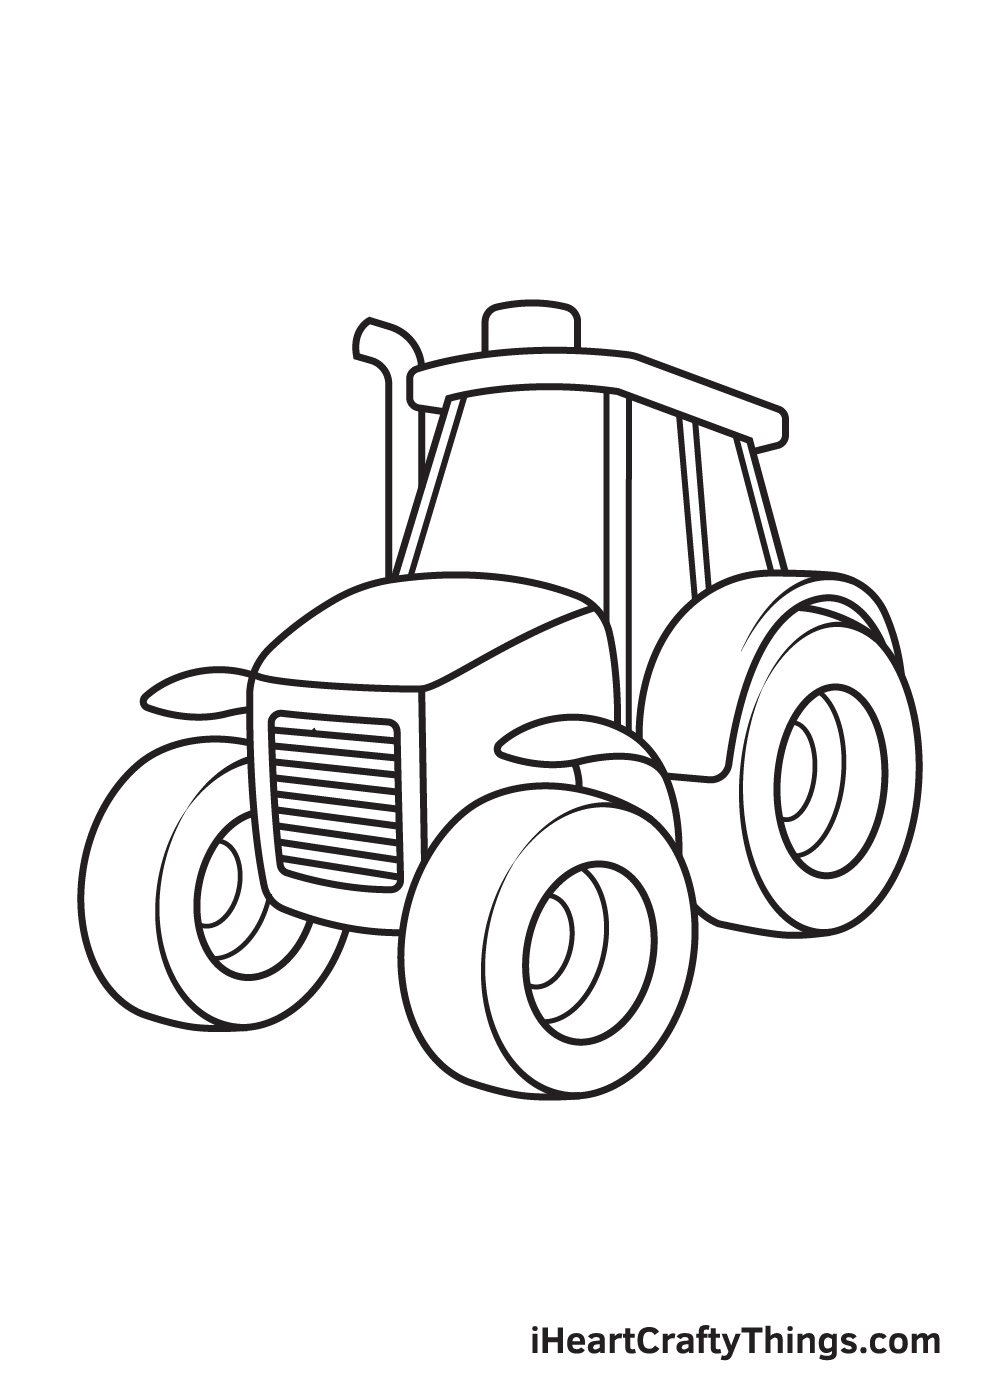 How to Draw Tractor Step by Step Very Easy  YouTube